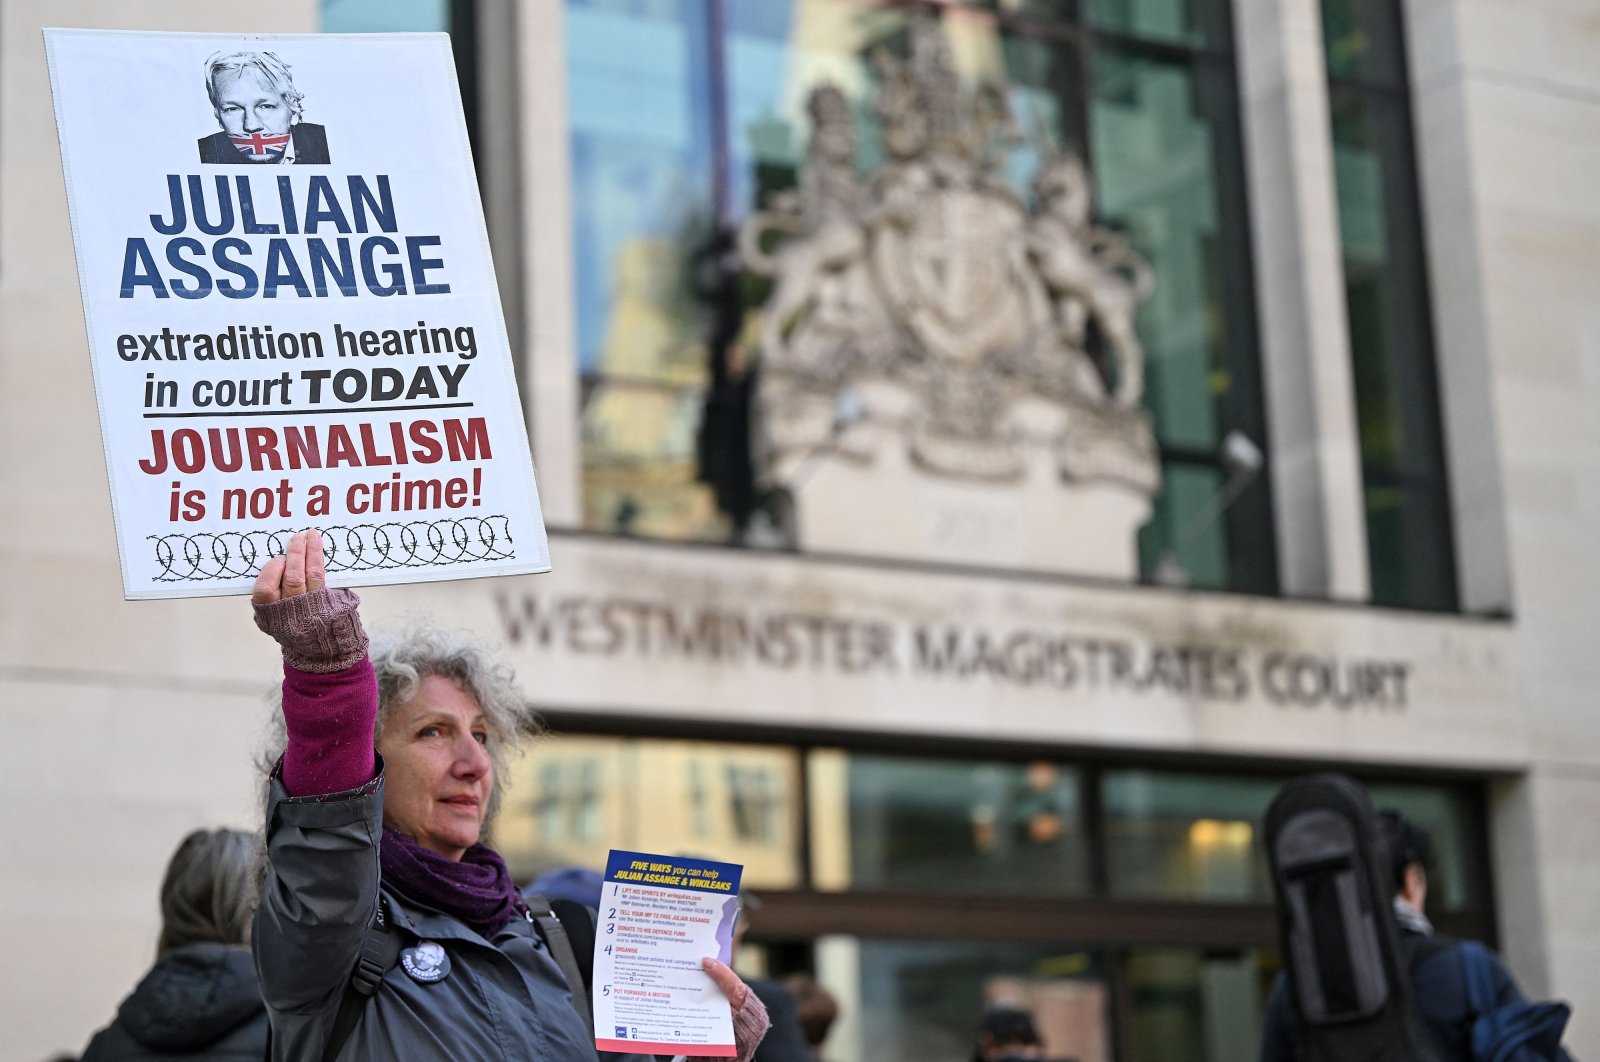 Supporters and activists hold placards outside Westminster Magistrates court calling for WikiLeaks founder Julian Assange to be freed, London, U.K., April 20, 2022. (AFP Photo)